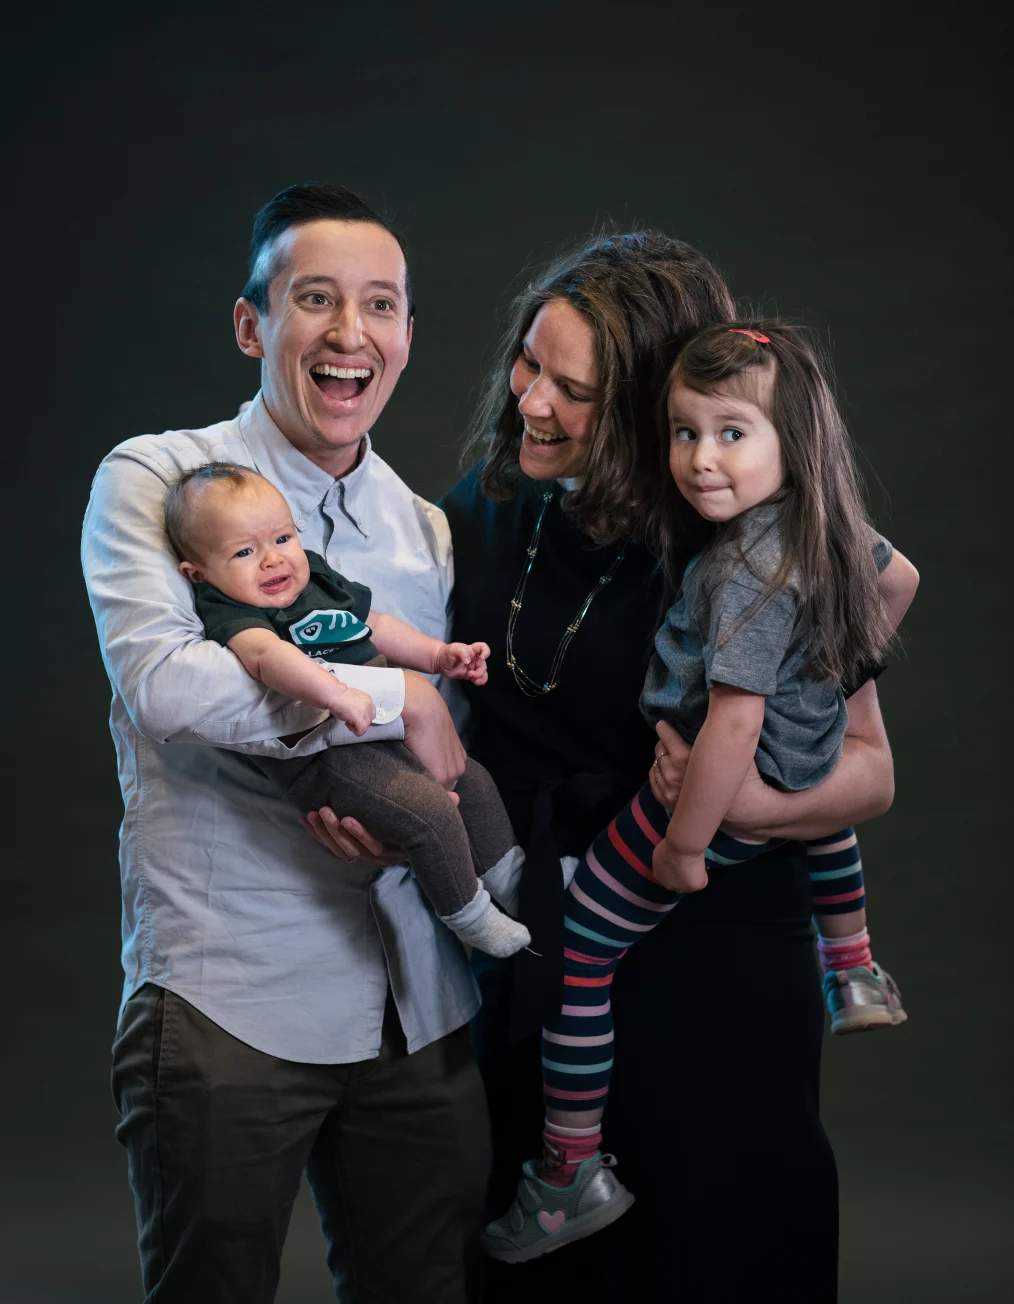 This picture shows a family of four with medium-skin tones smiling and looking
towards the camera, with a dark gray background.